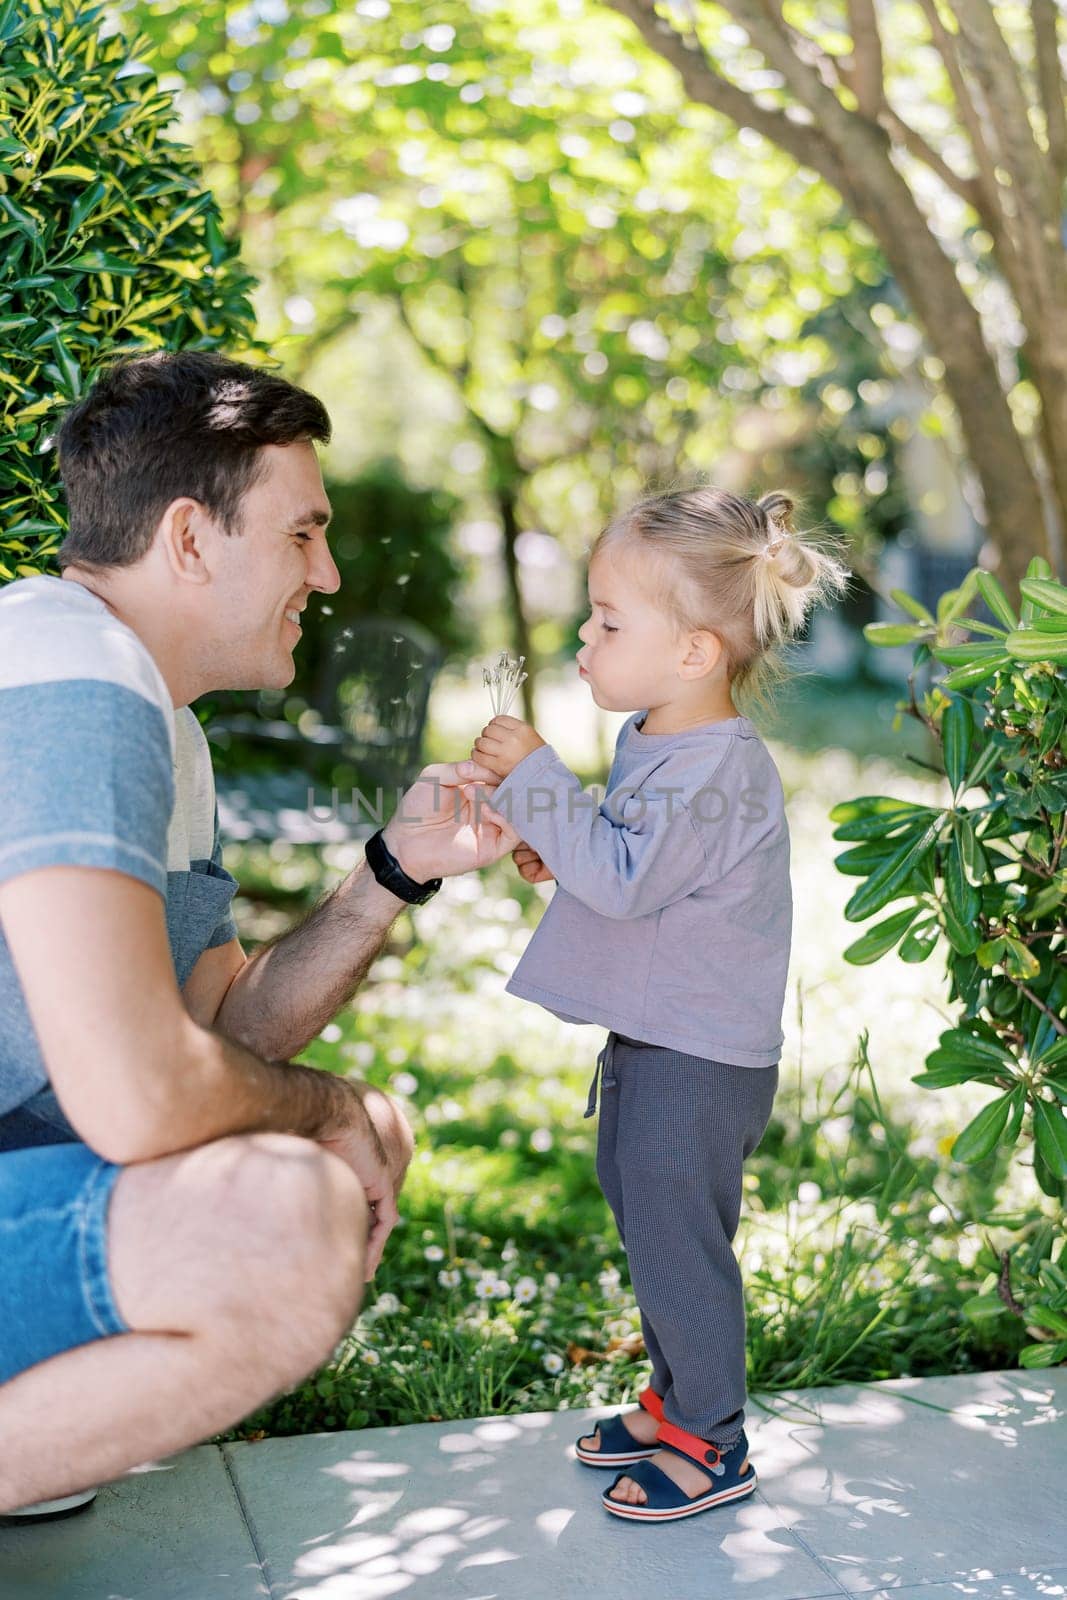 Little girl blows dandelions at squinting smiling dad. High quality photo